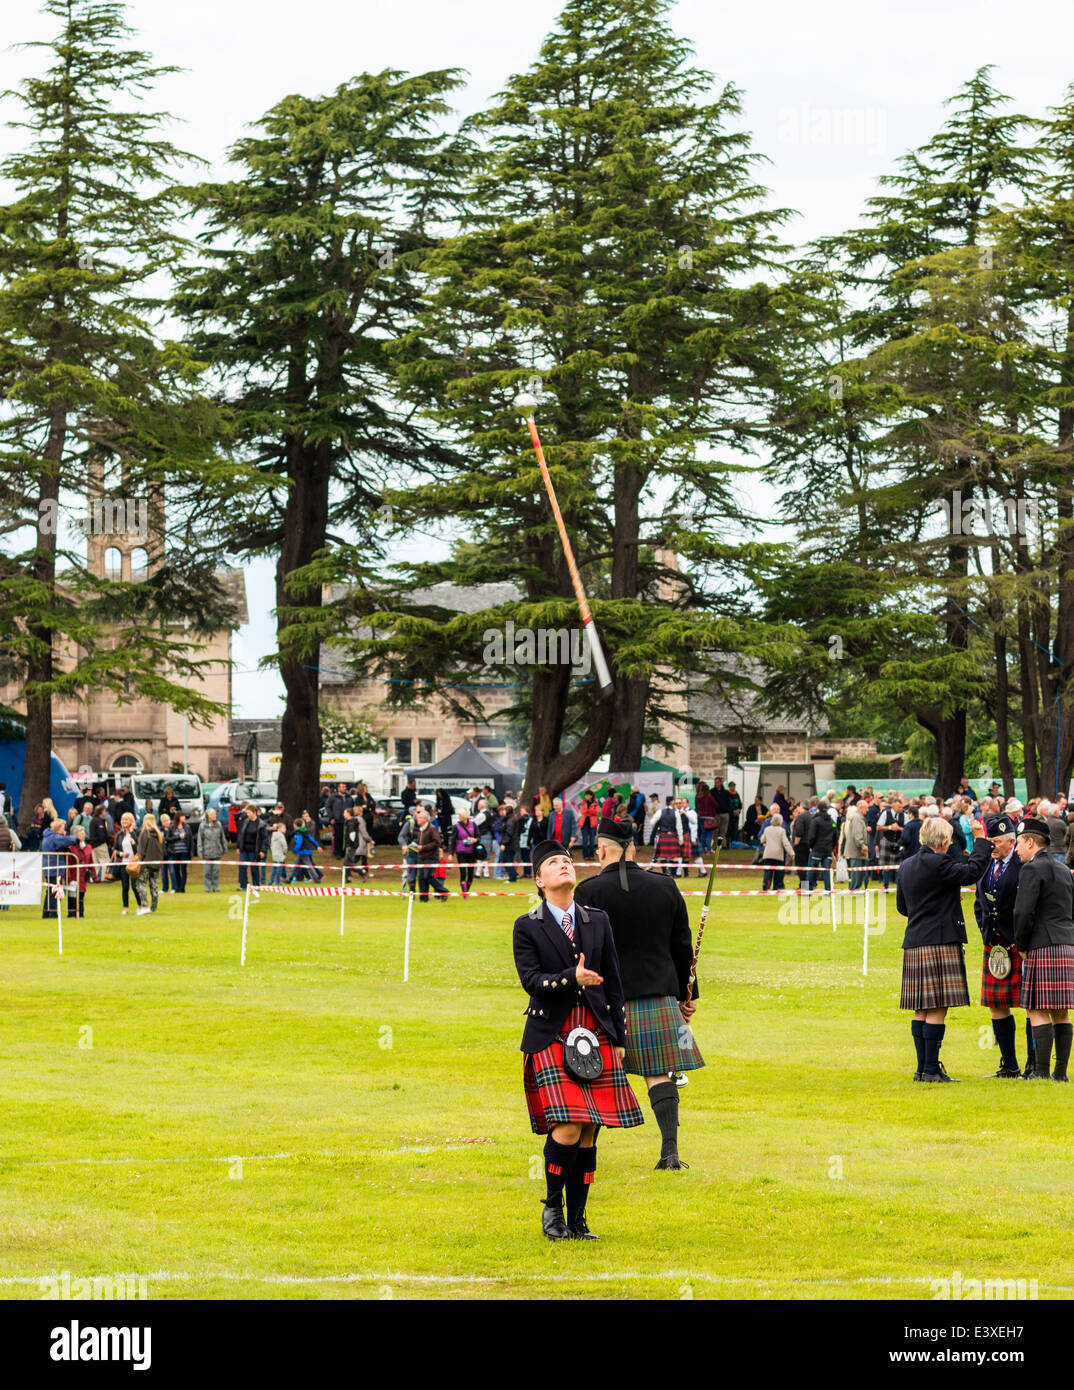 LADY DRUM MAJOR ABOUT TO CATCH A MACE AT FORRES SCOTLAND EUROPEAN PIPE BAND CHAMPIONSHIPS JUNE 2014 Stock Photo